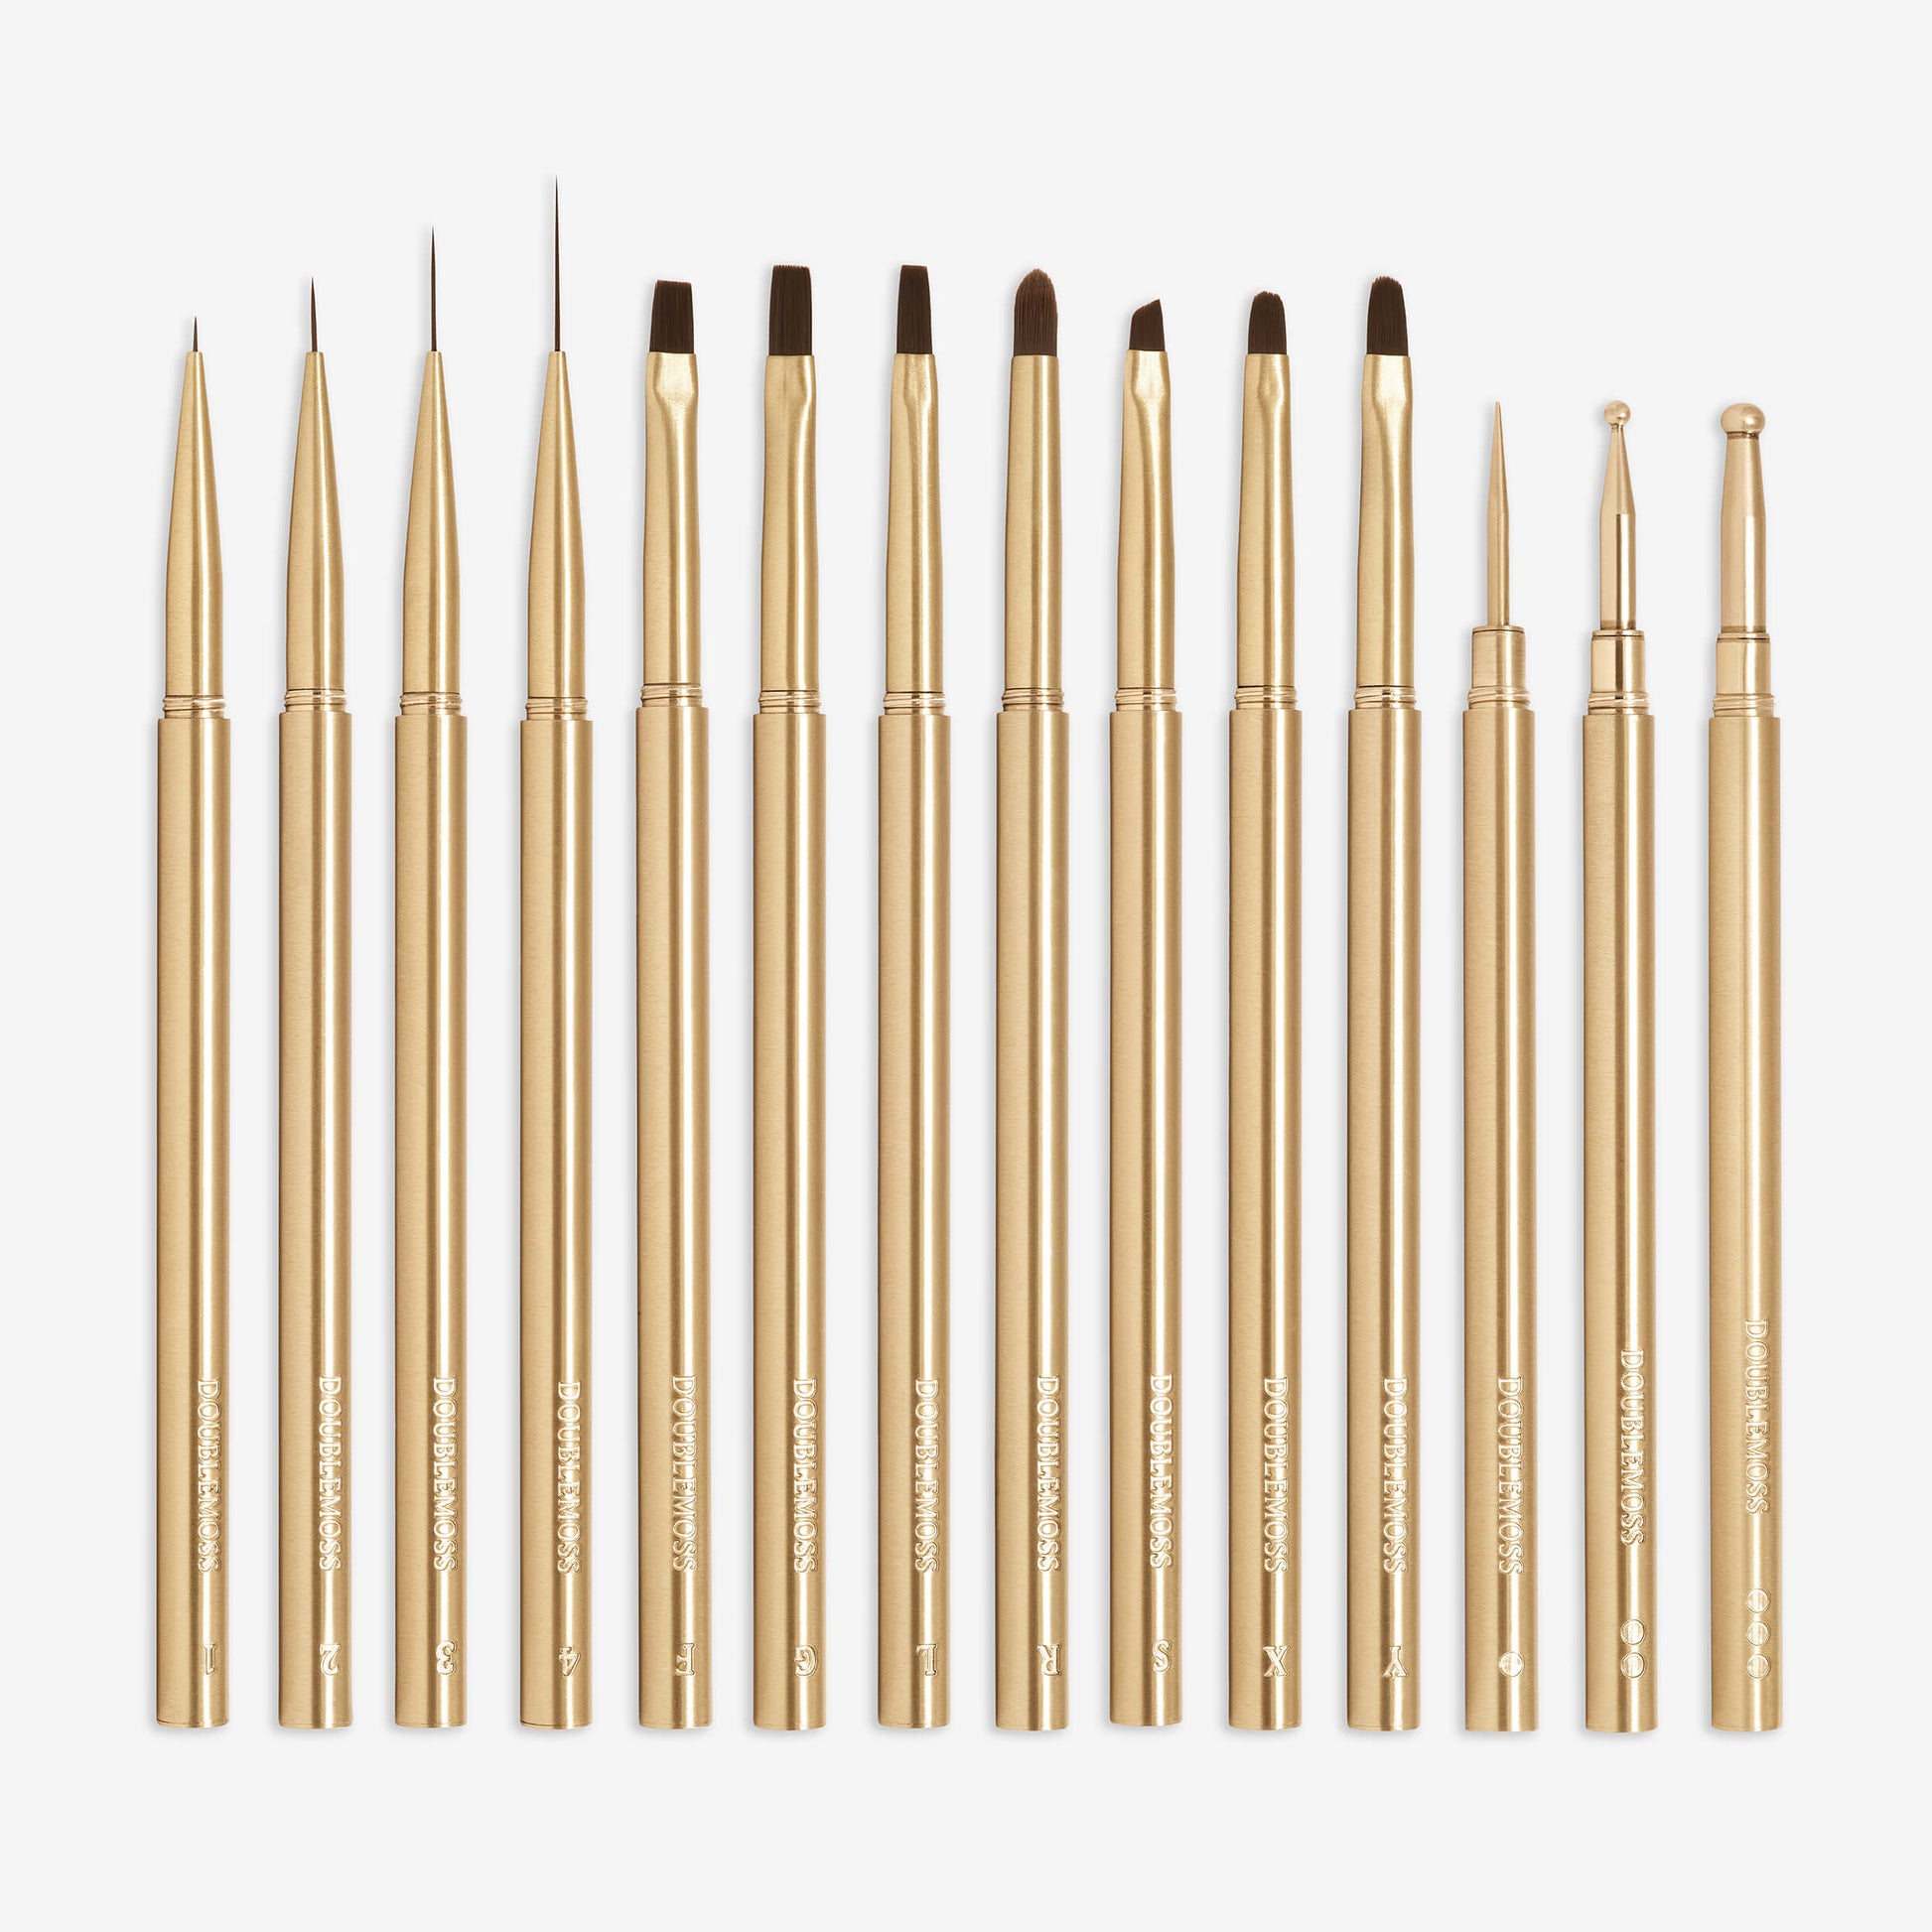 The Arte 1 Brush is a Nail Art Brushes -Brass -Brush- made by Doublemoss Arte